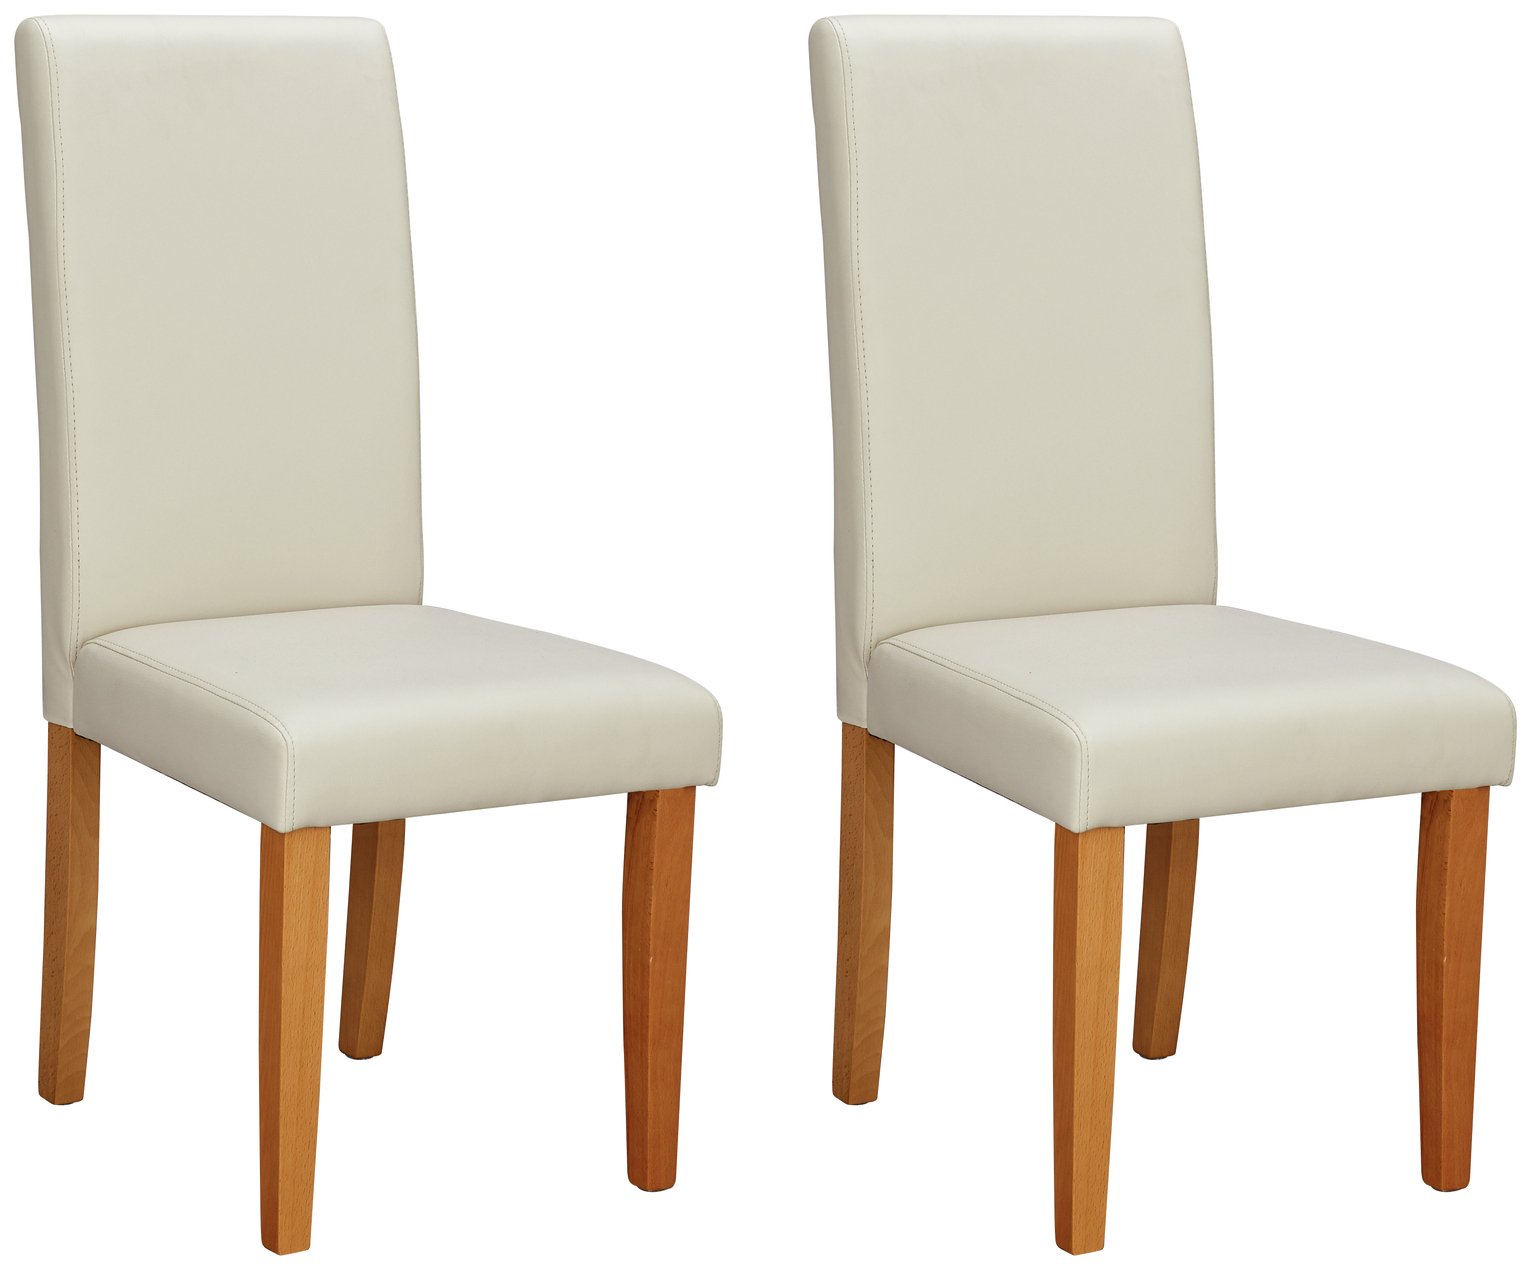 Argos Home Pair of Midback Dining Chairs - Cream